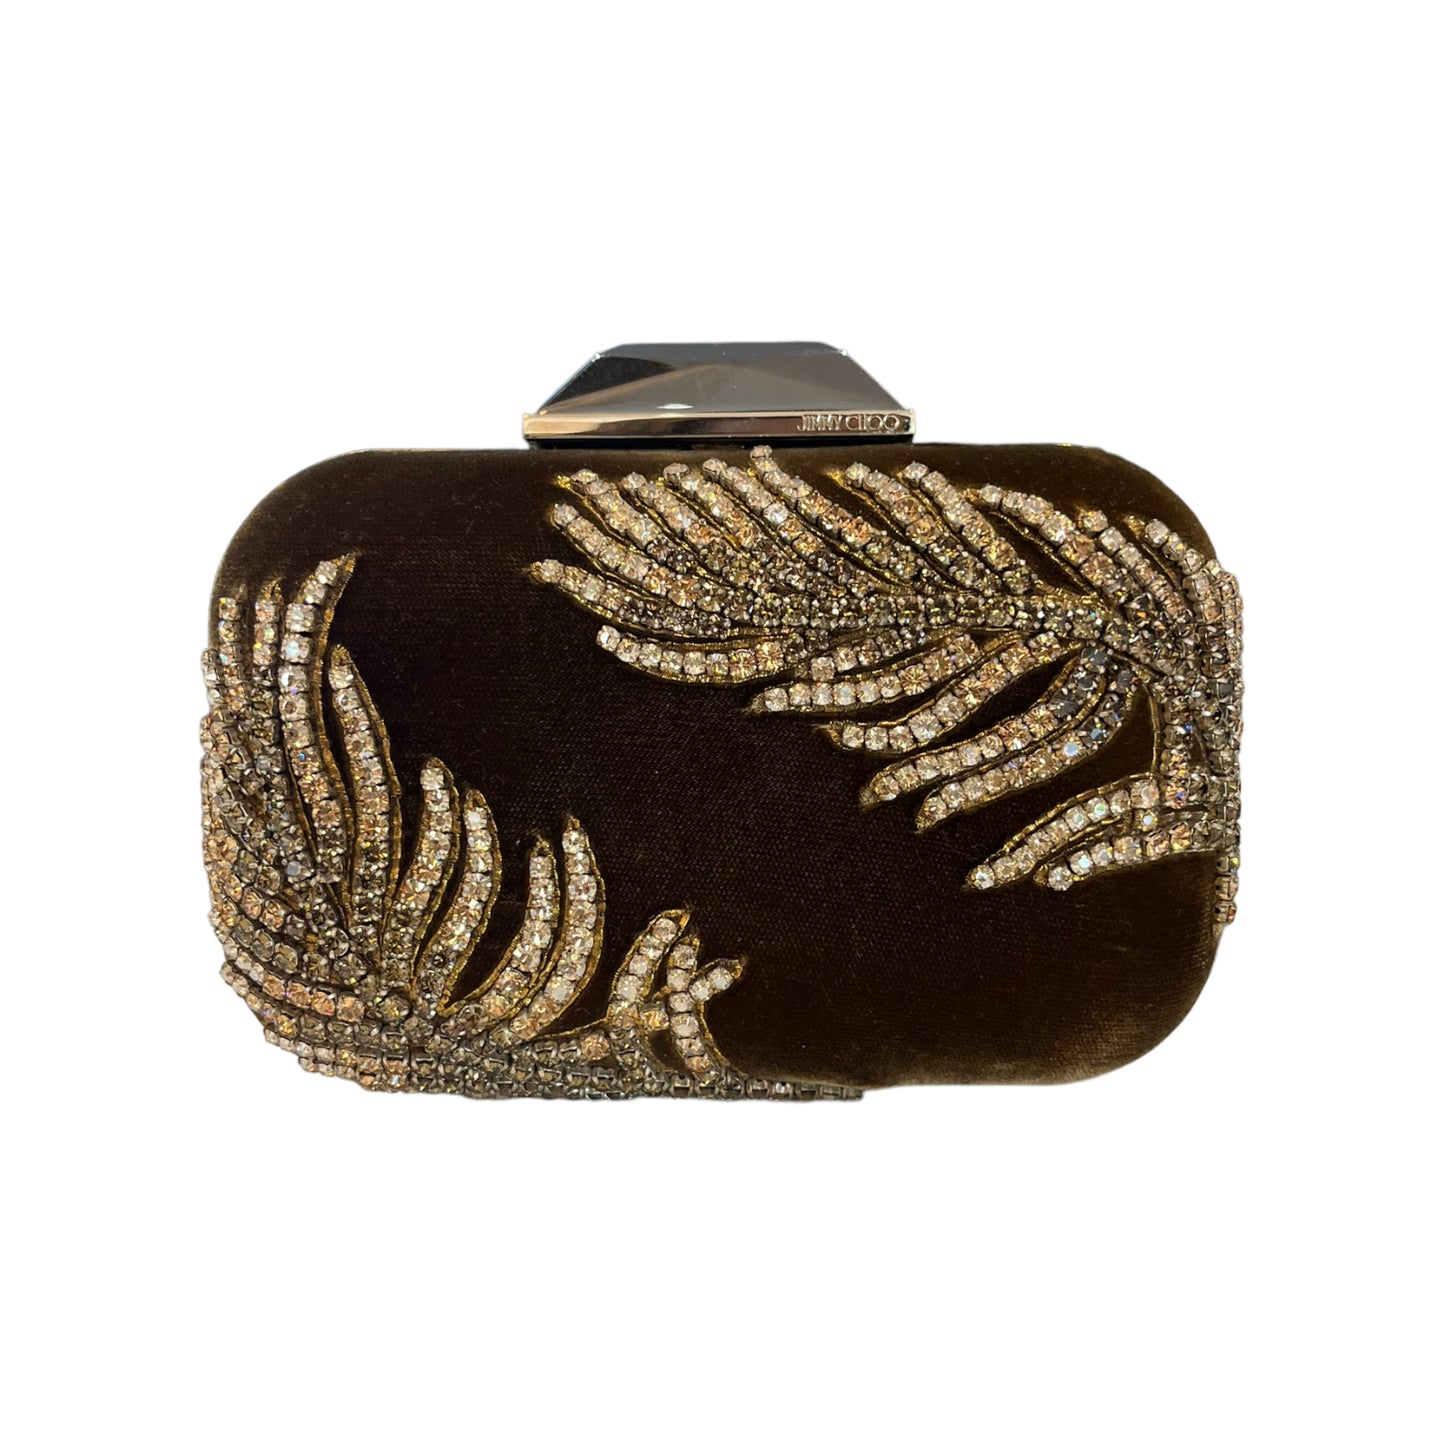 NEW Jimmy Choo Brown Velvet and Sparkly Clutch